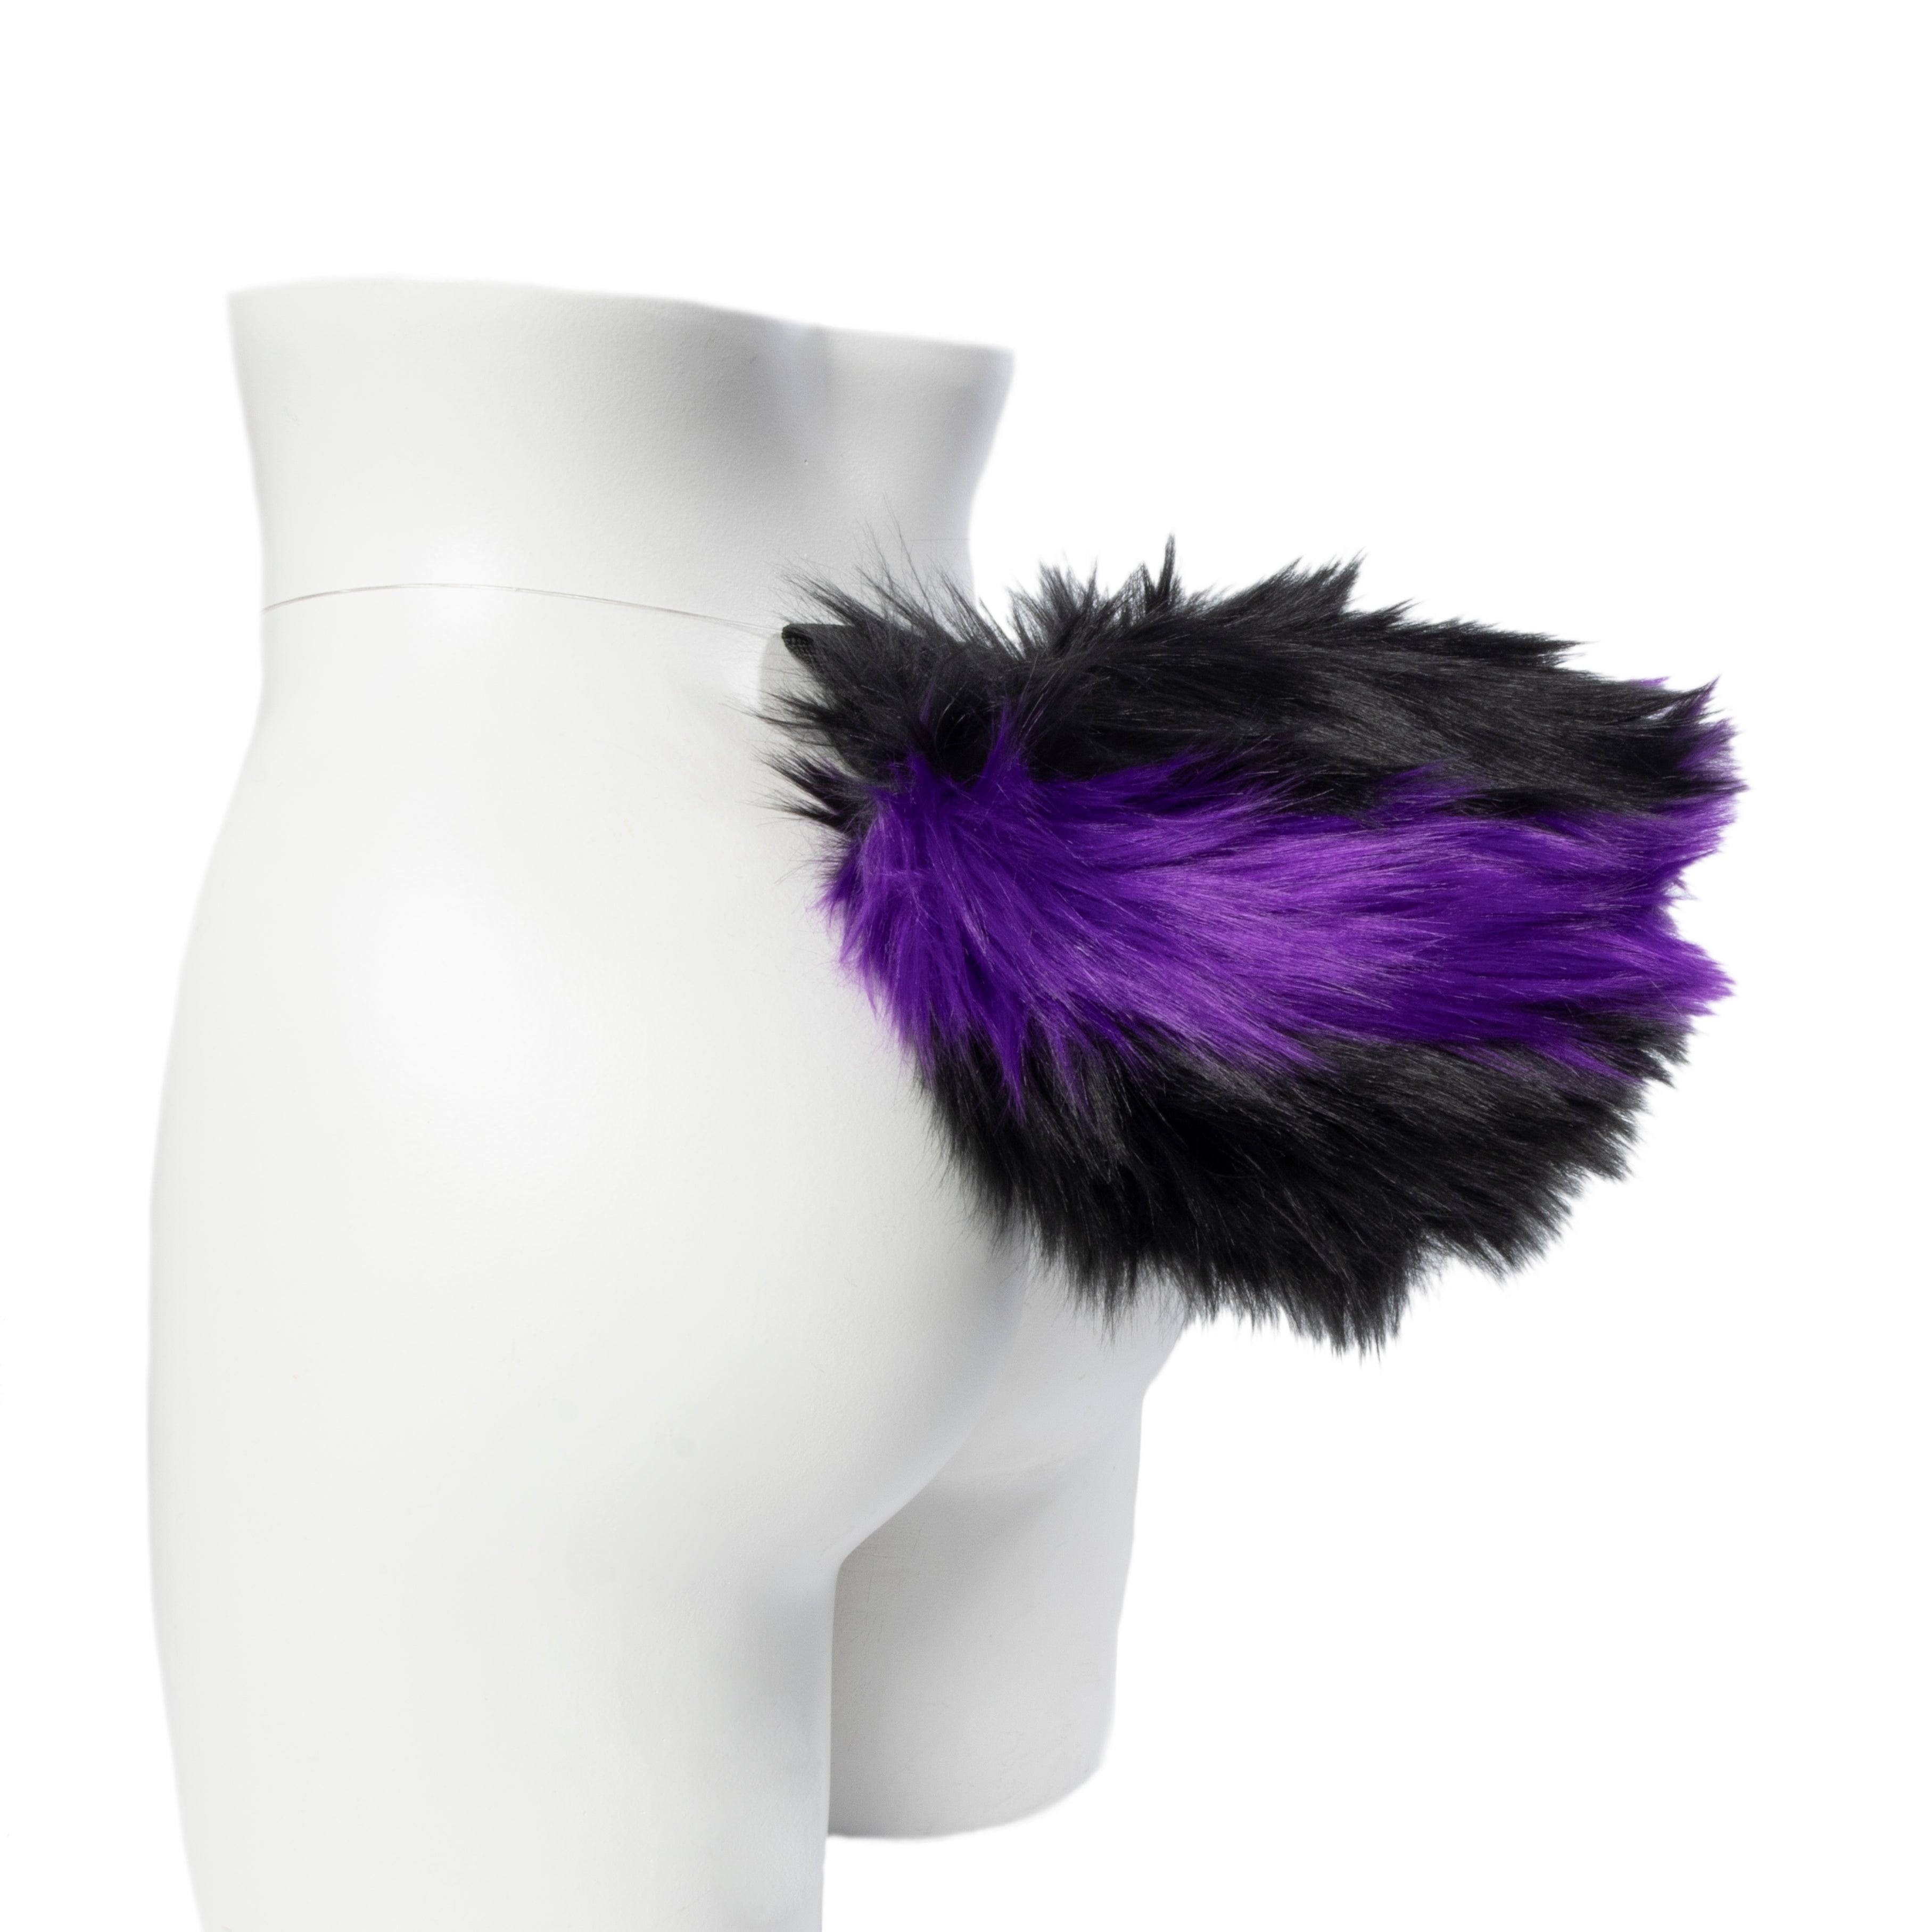 Pawstar Bunny rabbit tail furry fluffy partial fursuit halloween costume or cosplay accessory  in black  and purple